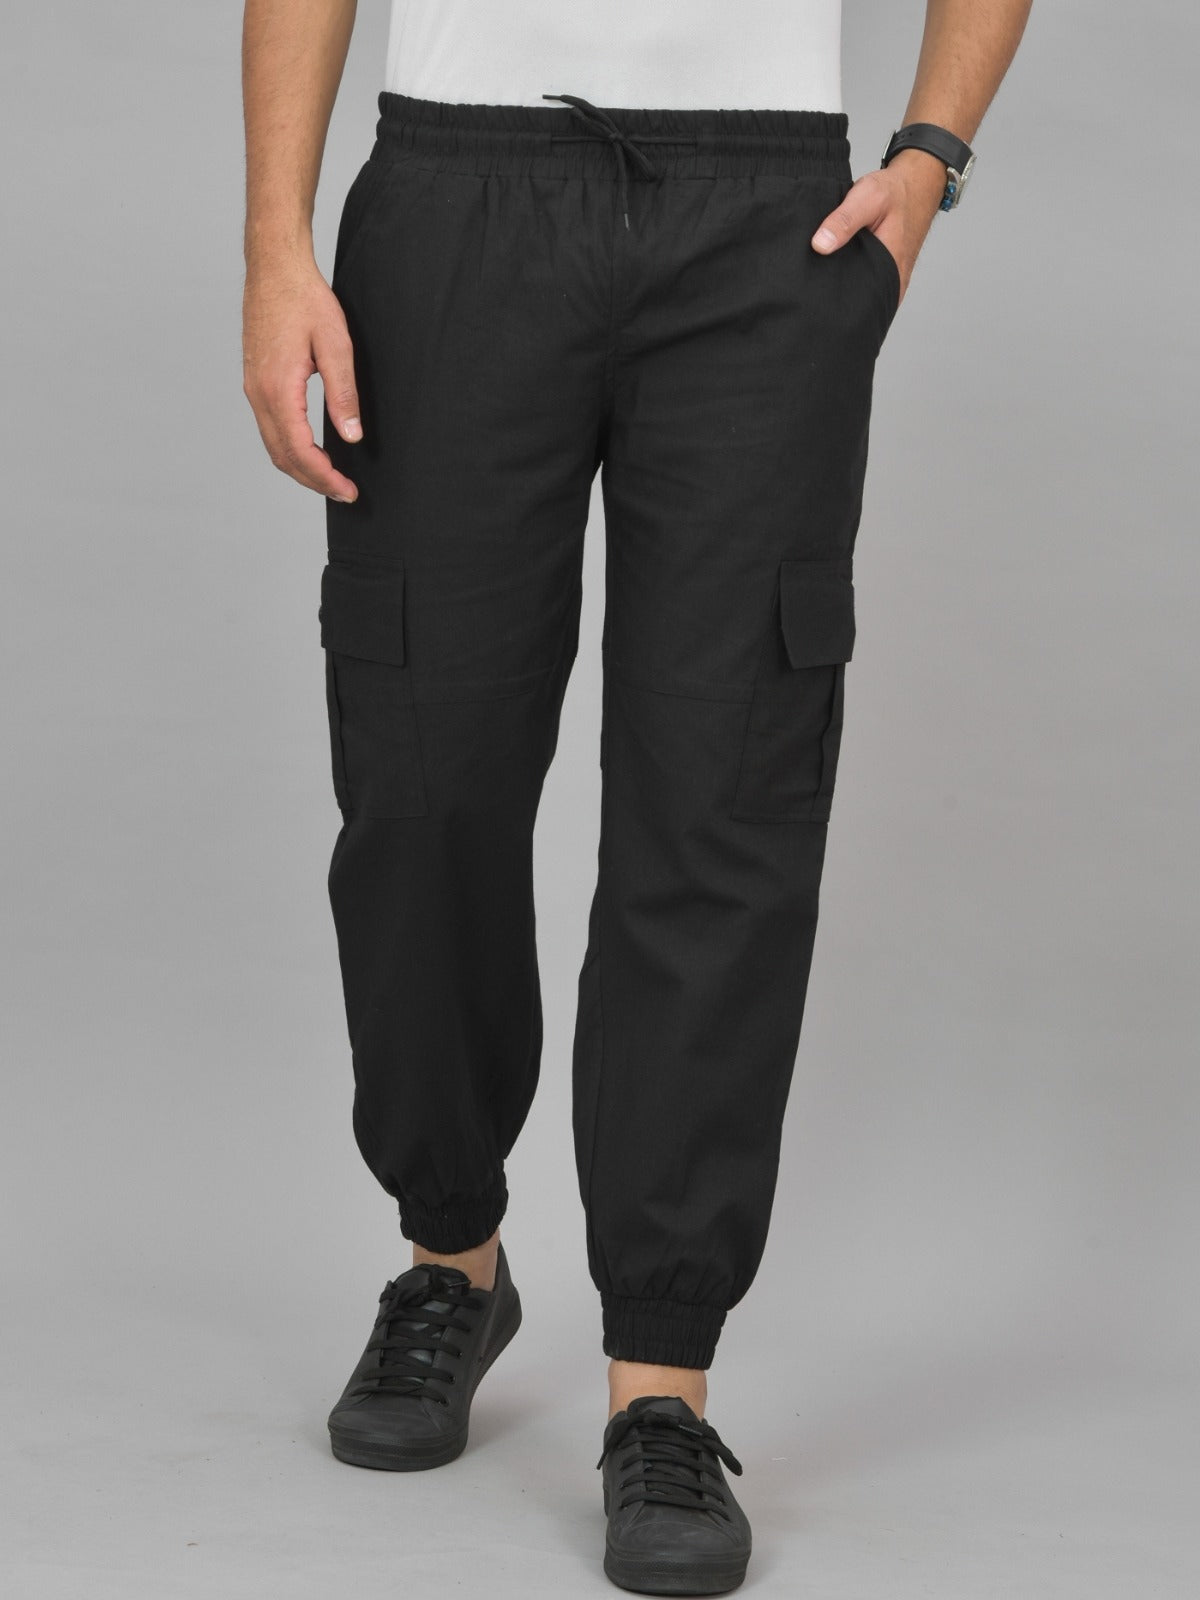 Combo Pack Of Mens Black And Brown Five Pocket Cotton Cargo Pants